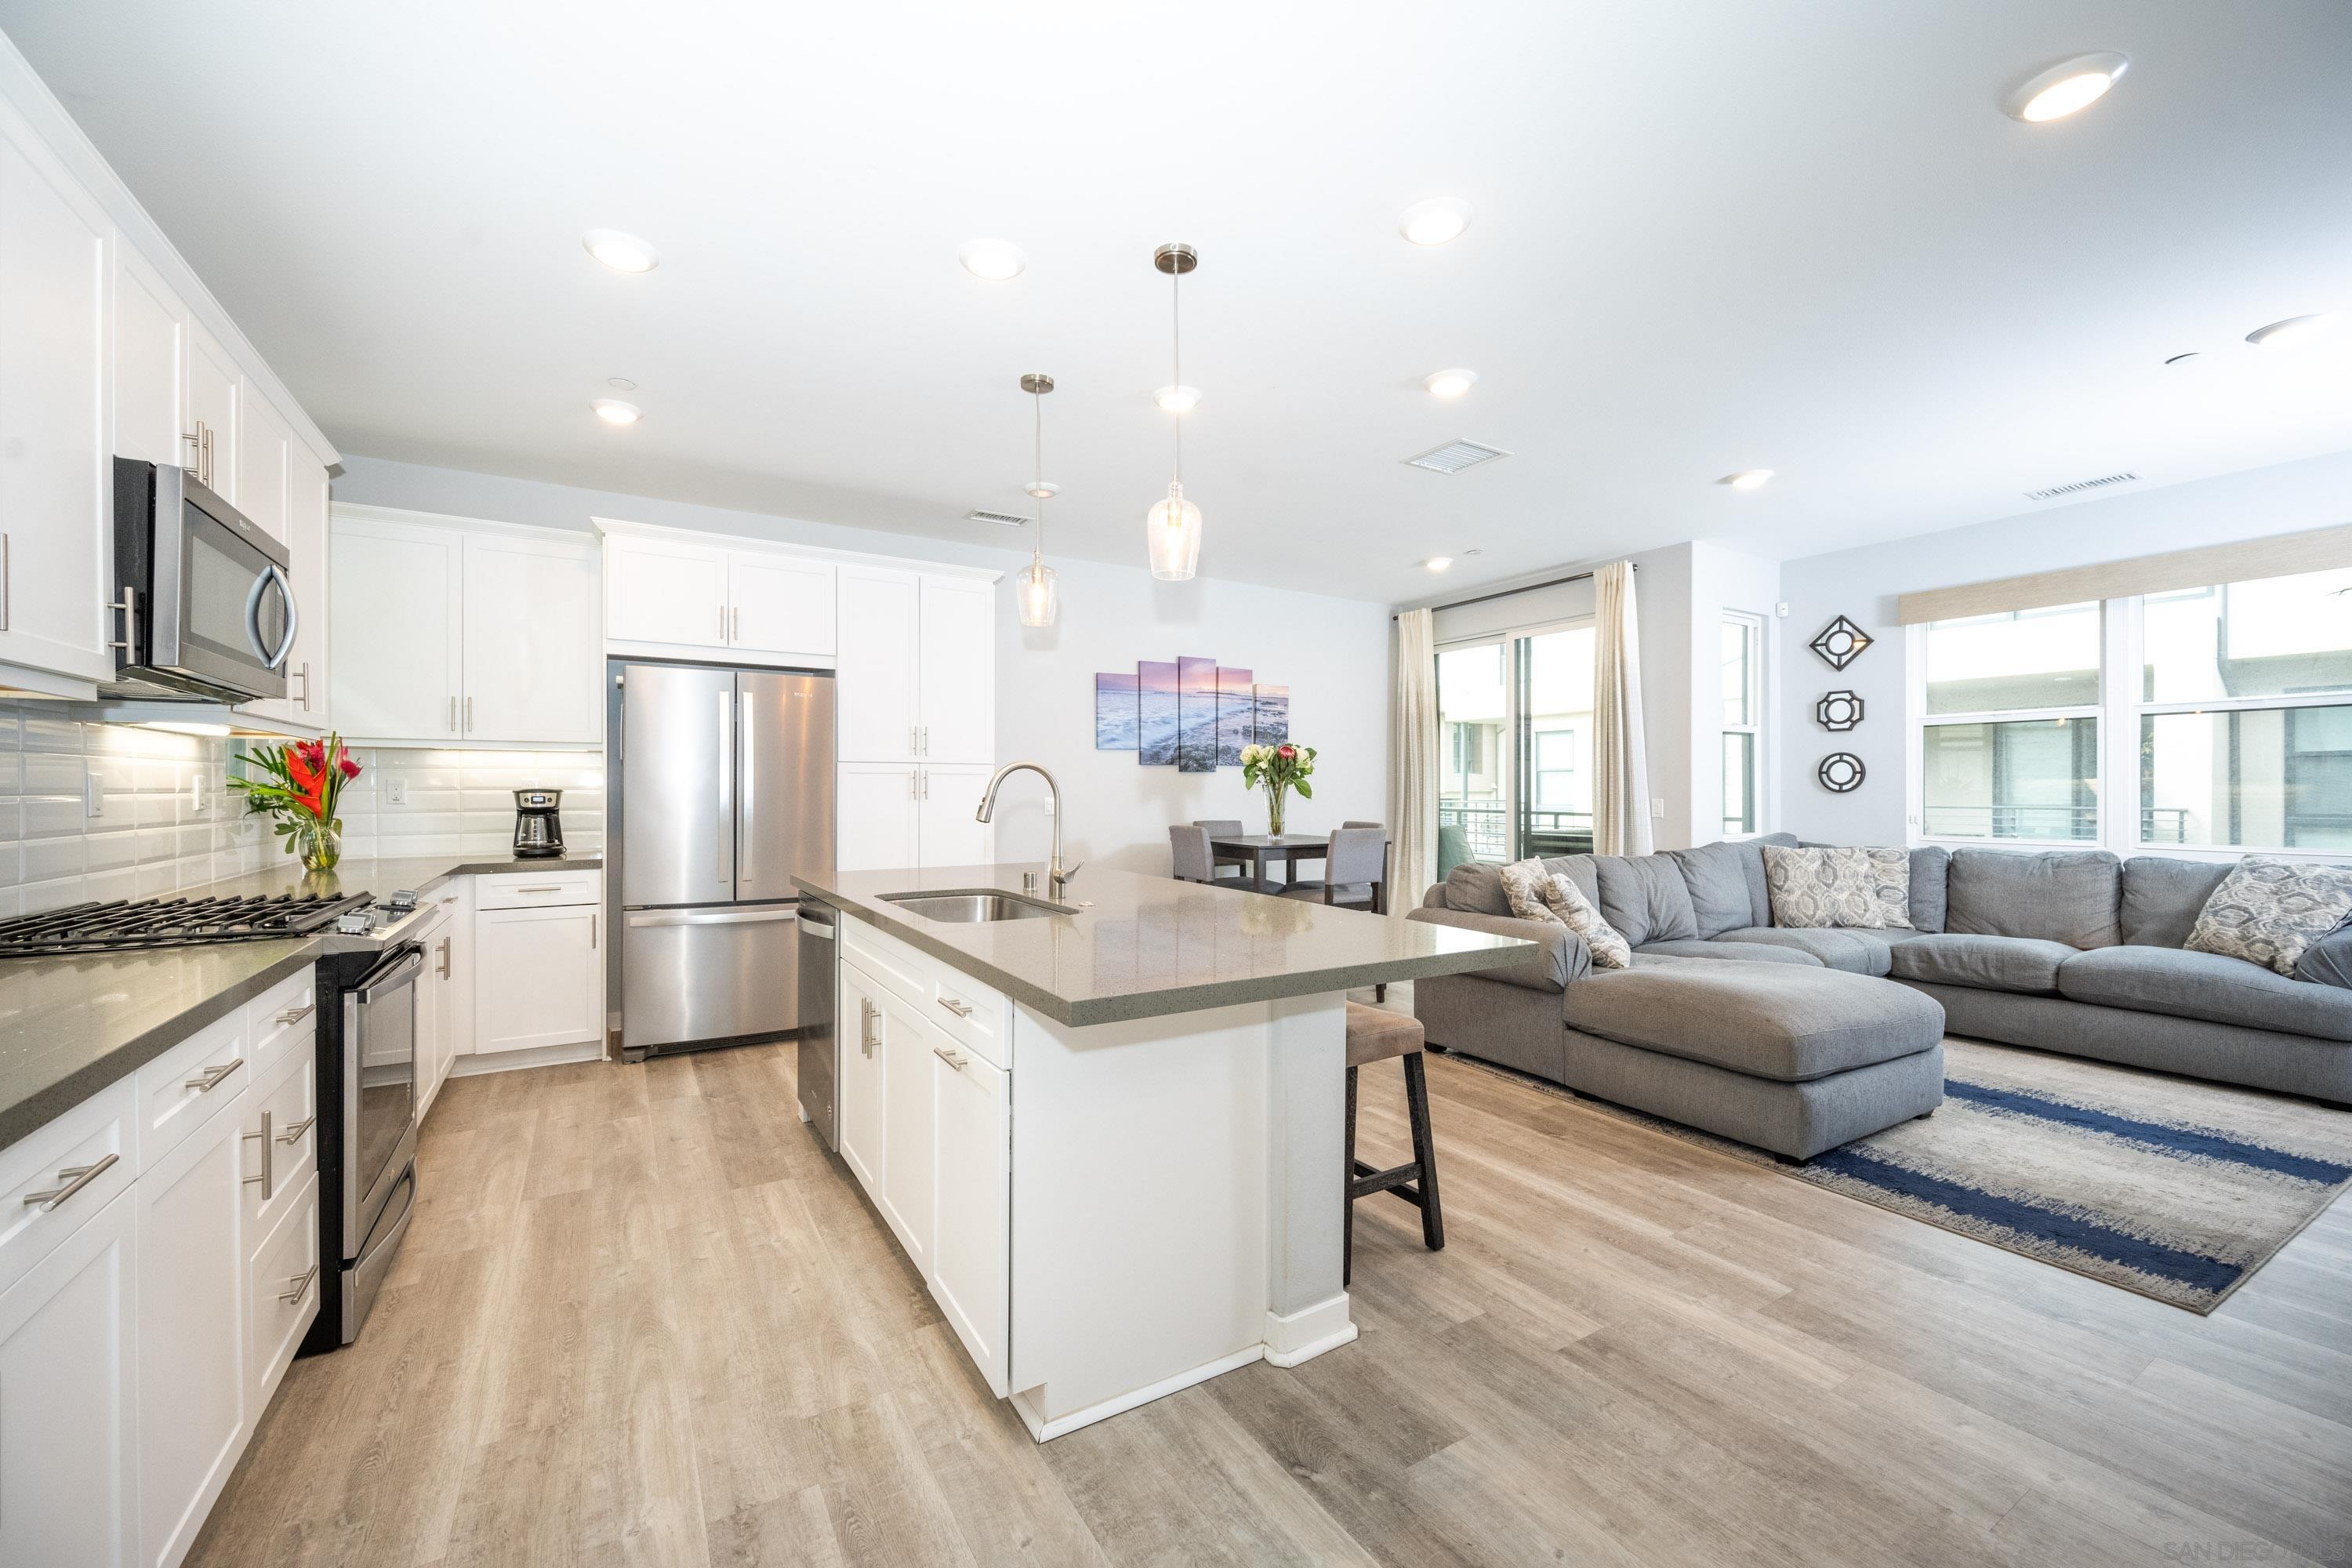 a kitchen with stainless steel appliances kitchen island granite countertop a refrigerator a sink dishwasher a stove and white countertops with wooden floor